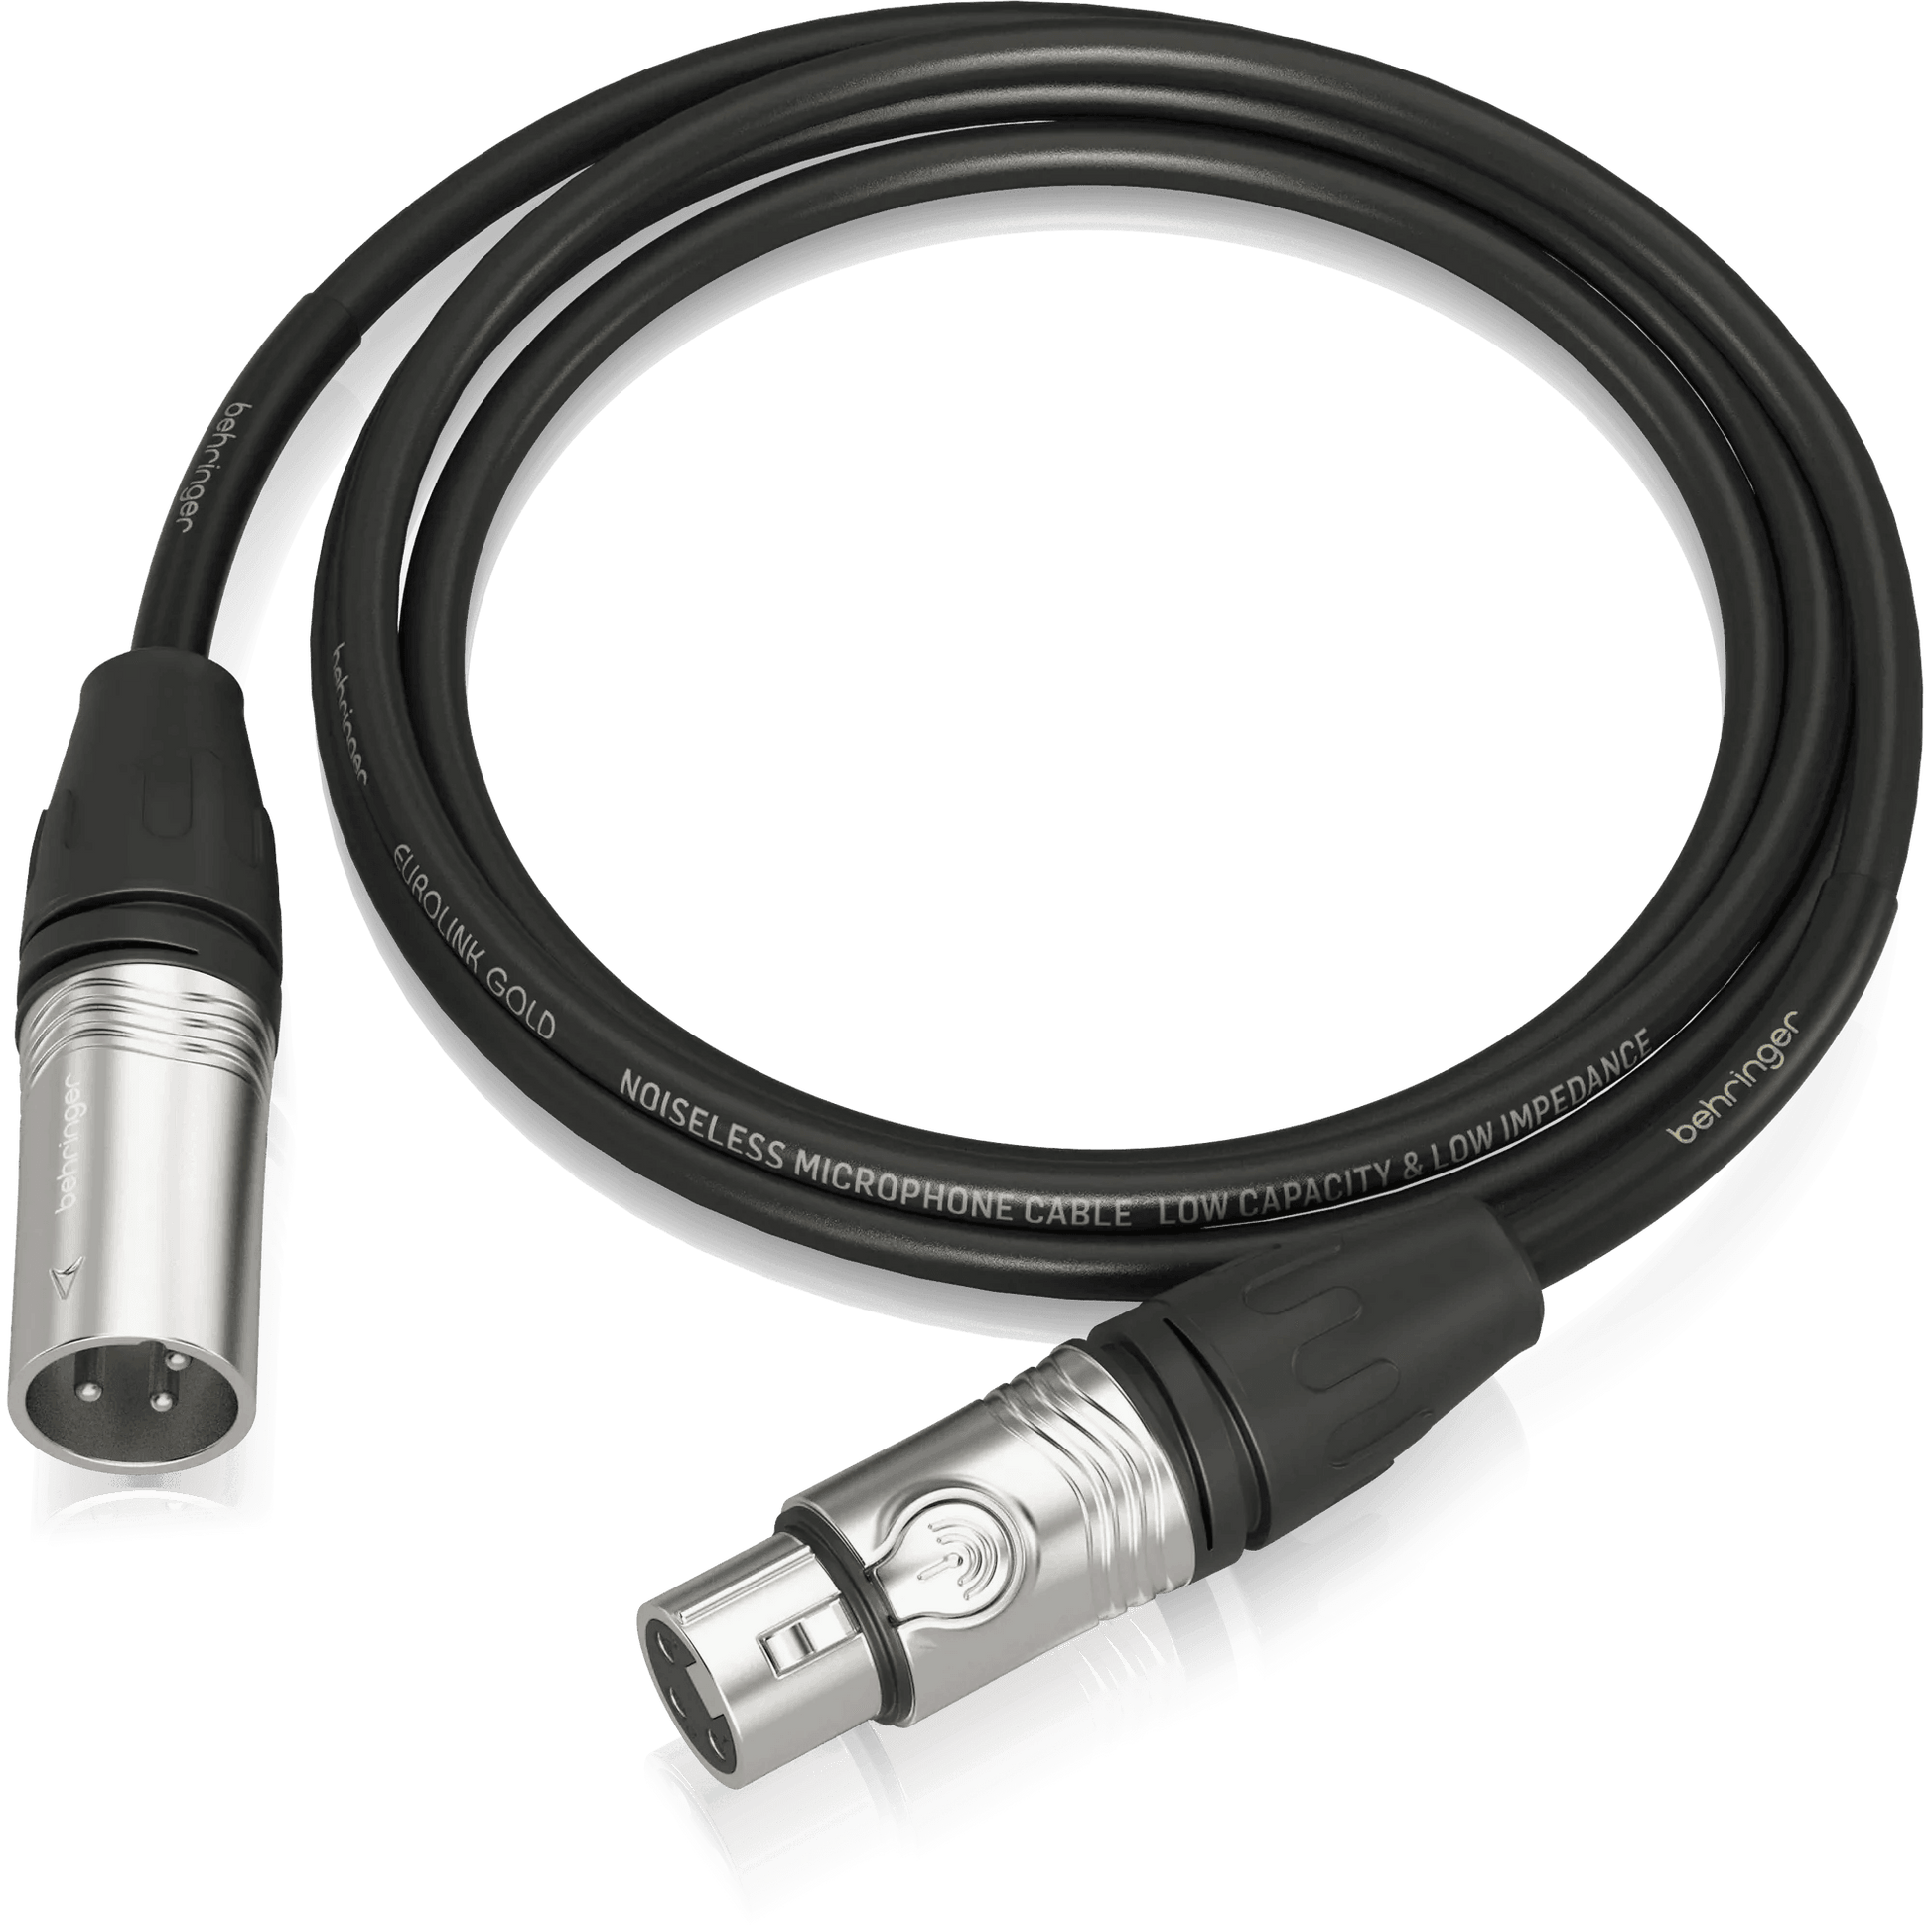 Behringer GMC-150 Gold Performance 1.5 m (5 ft) Microphone Cable with XLR Connectors